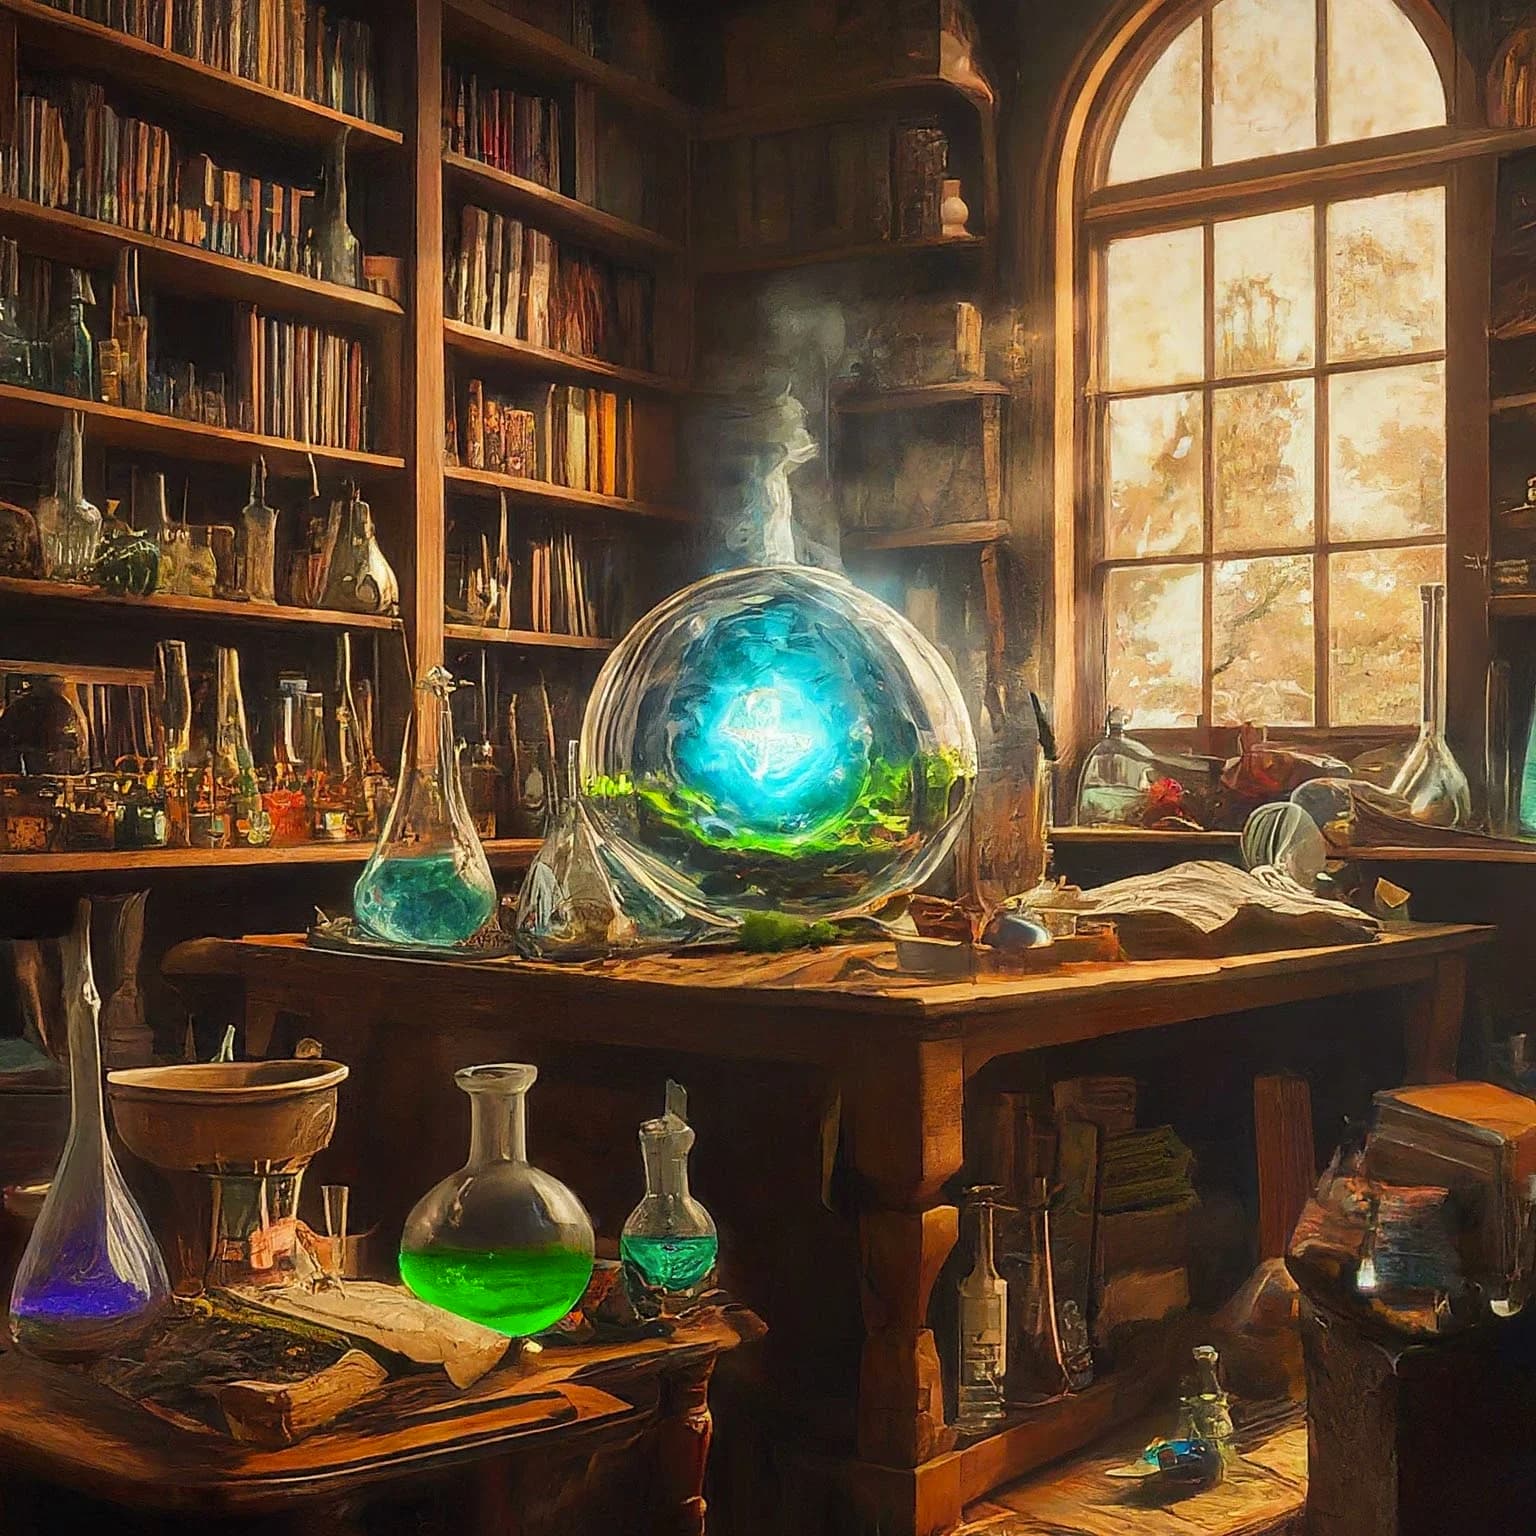 Prompt: “Generate an image of a cluttered alchemist's workshop, filled with bubbling flasks, glowing crystals, and the tiny, luminous world swirling within the bottle.”